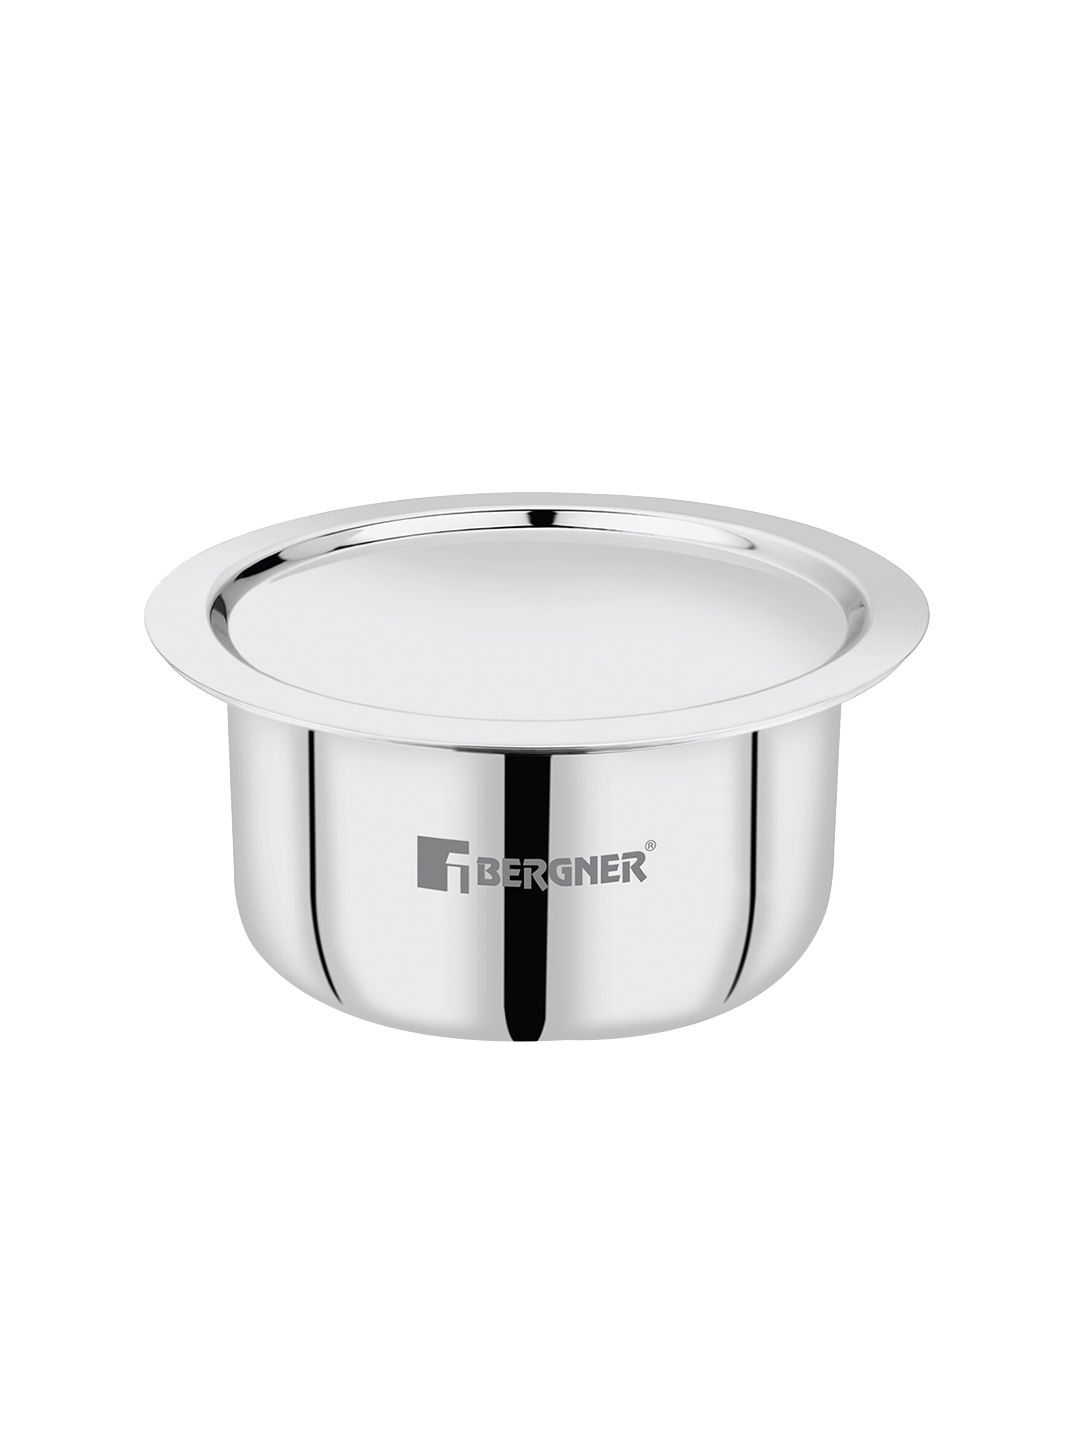 BERGNER Silver-Toned Solid Stainless Steel Tope With Lid Cookware Price in India